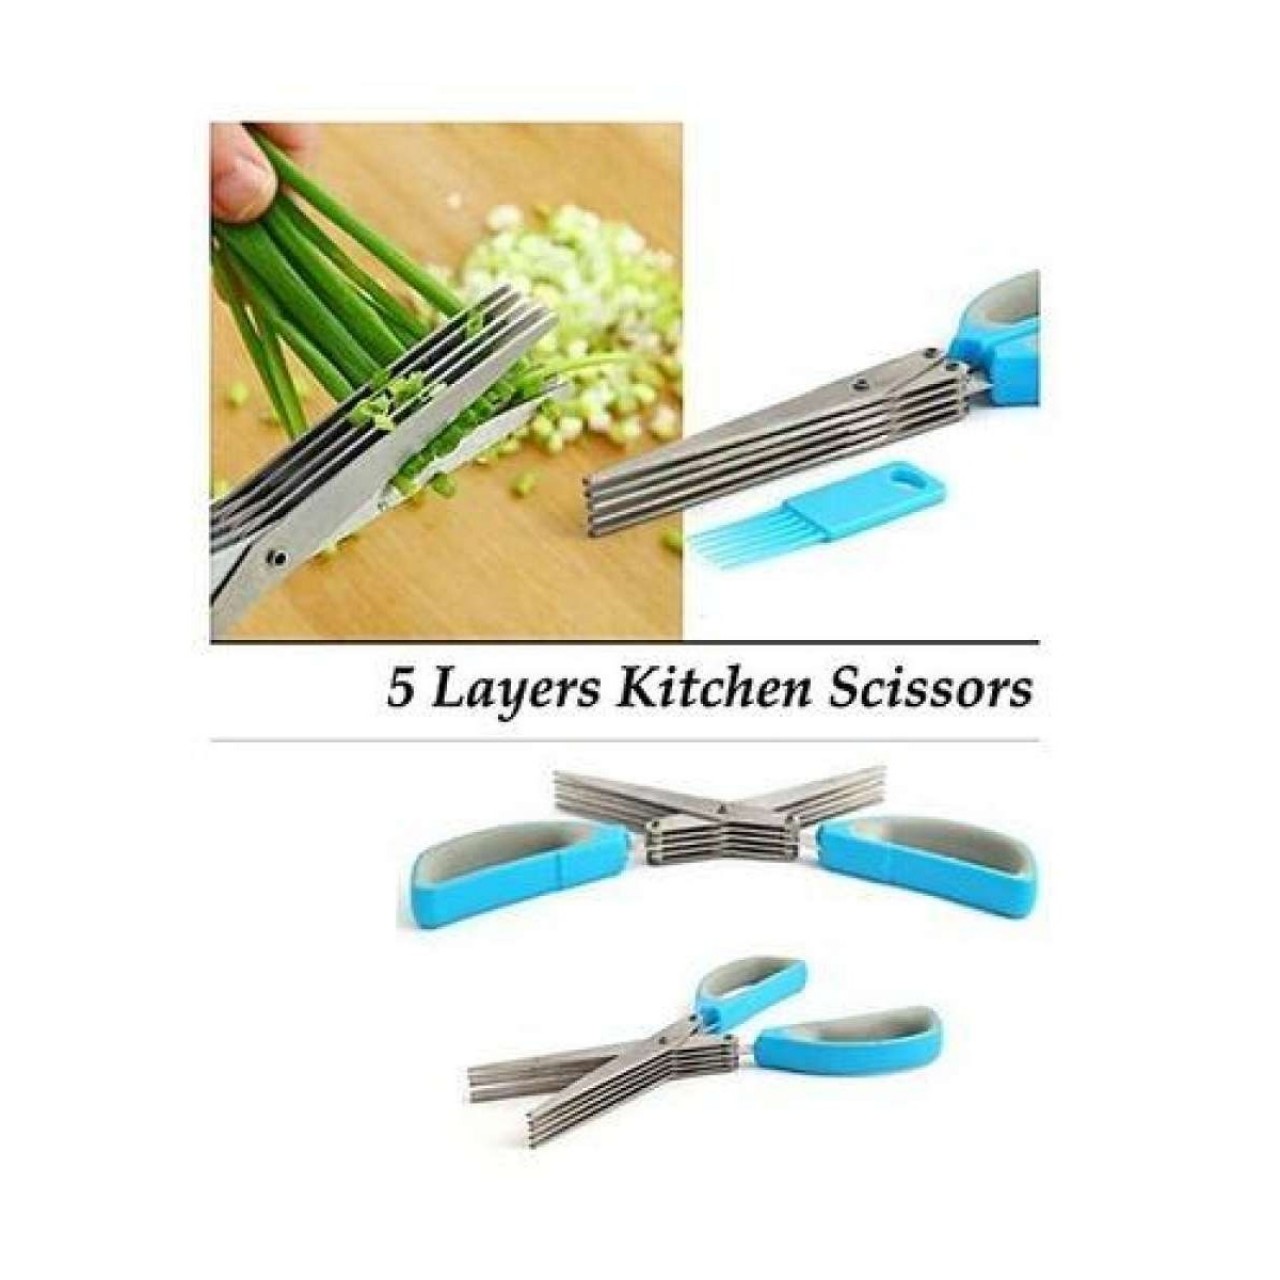 Stainless Steel 5 Layers Kitchen Scissor & Cleaning Brush